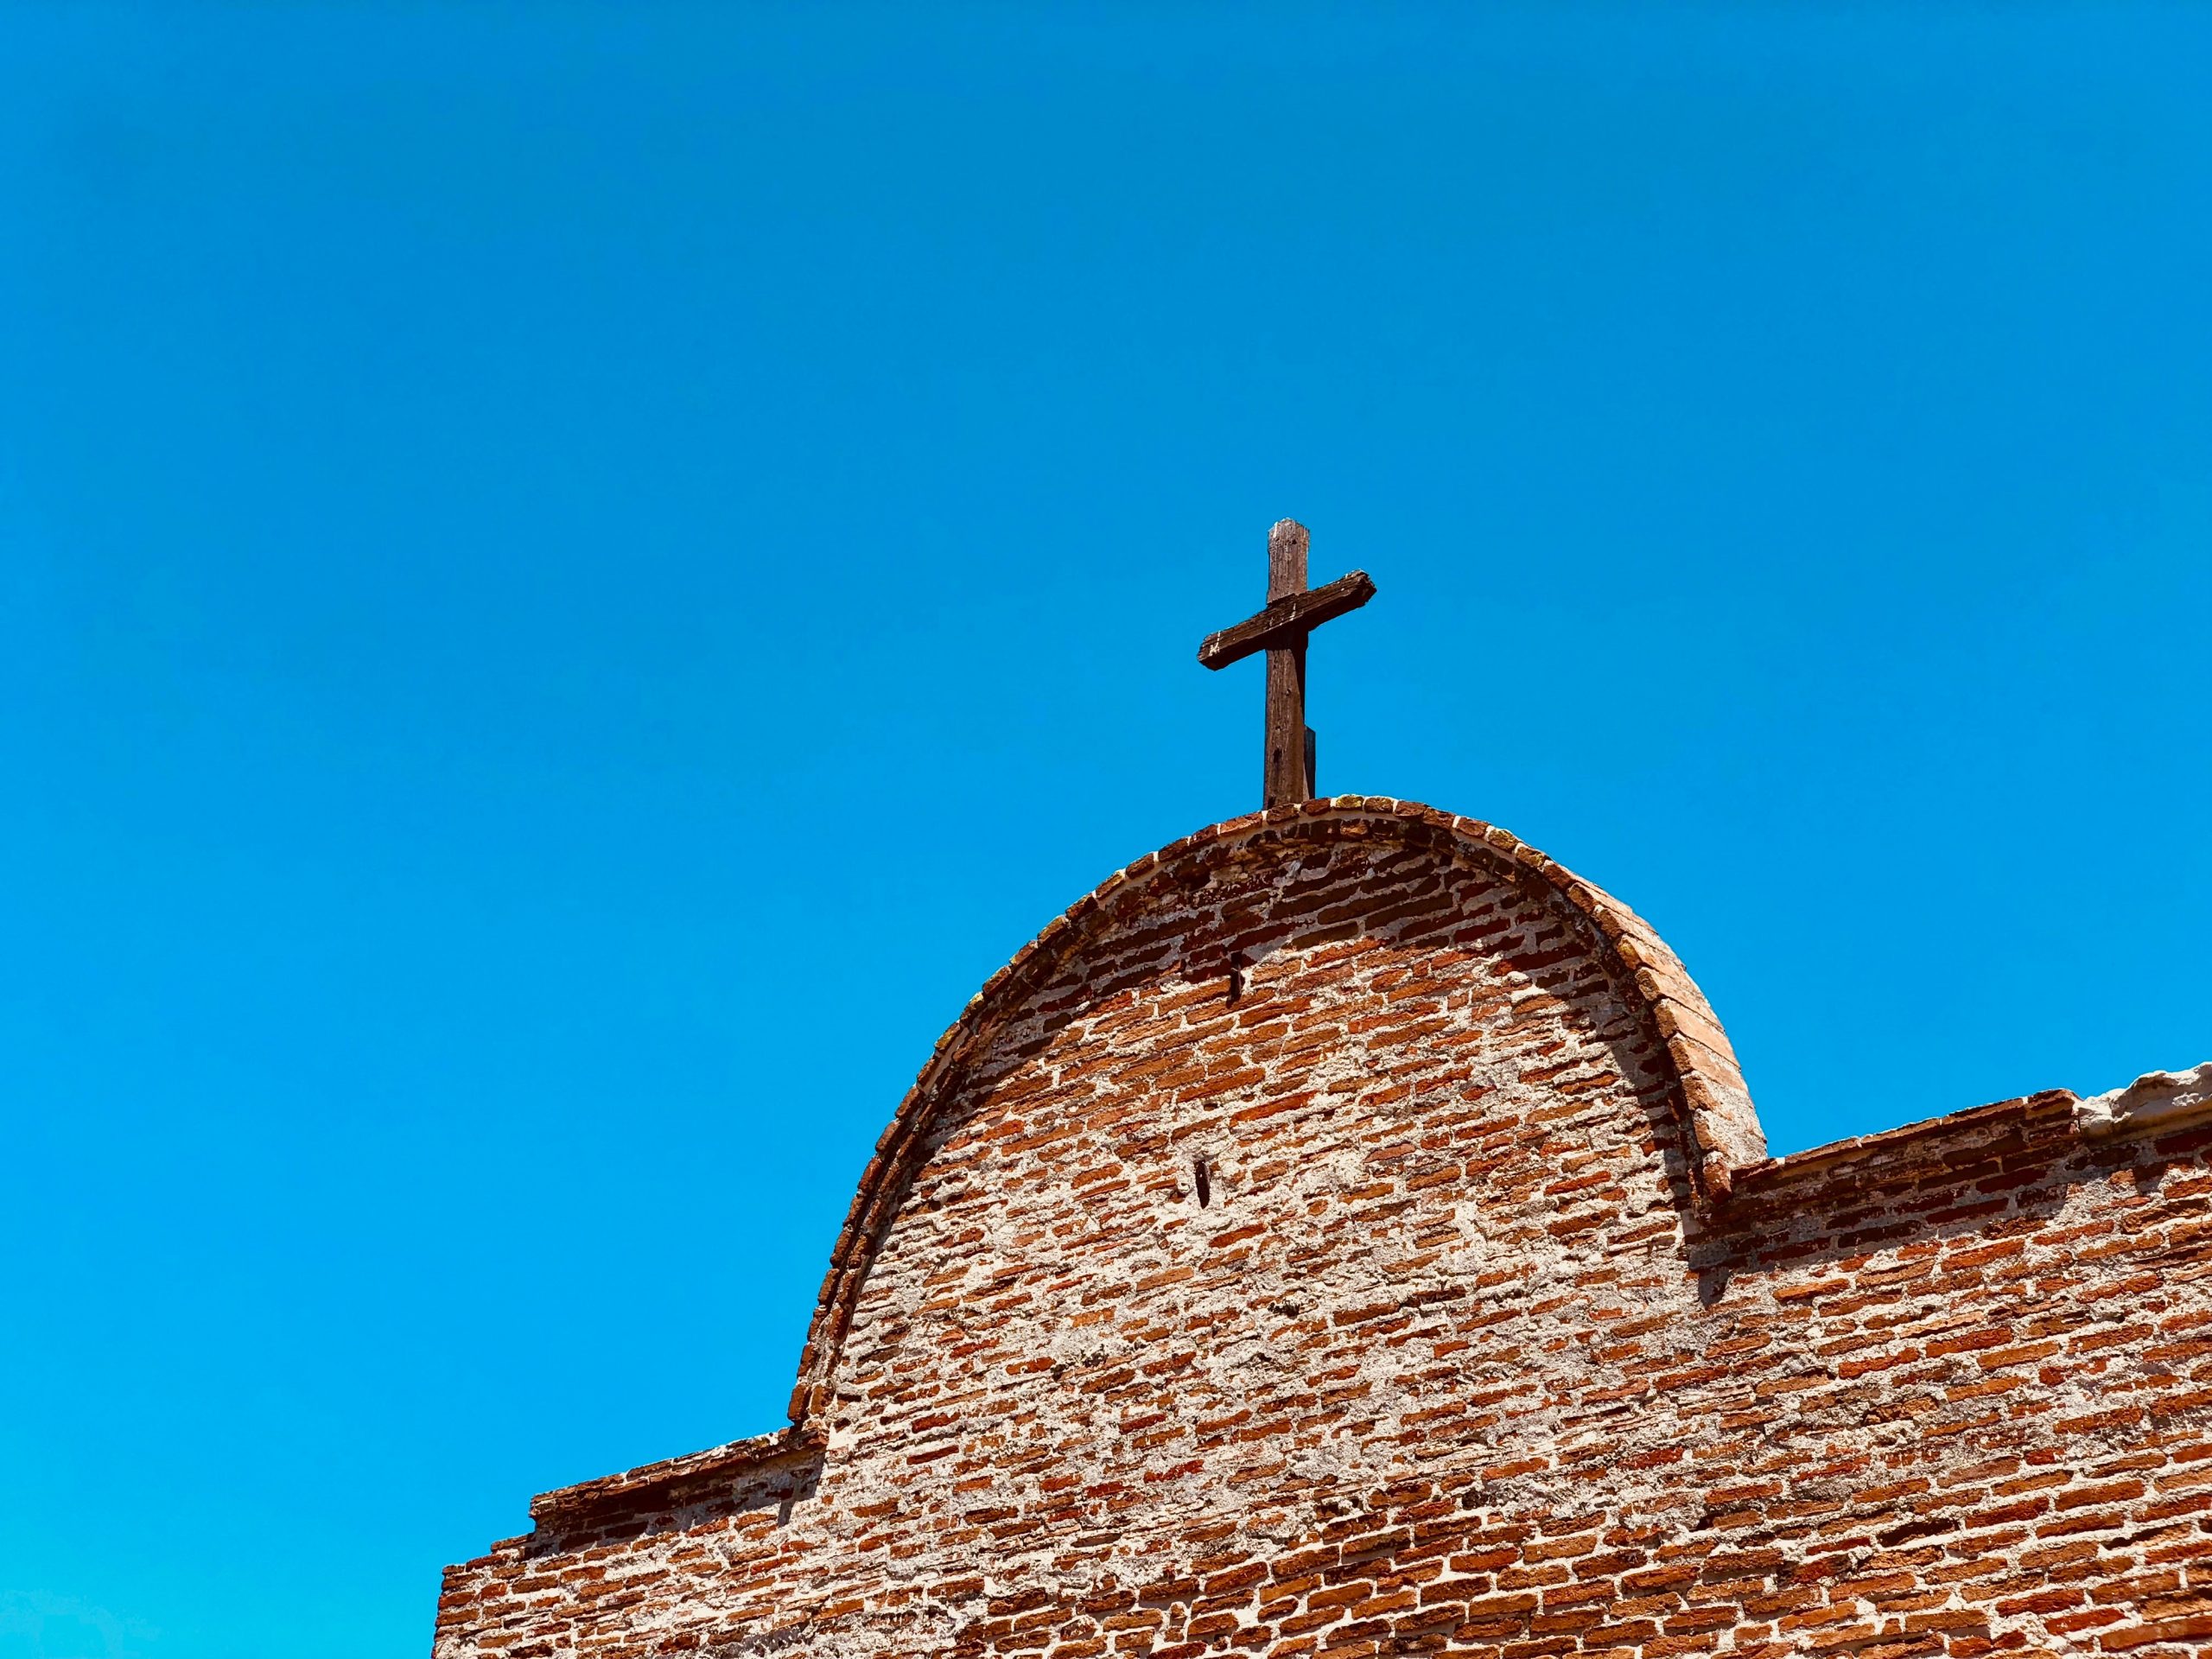 Image of cross on top of a mission style building